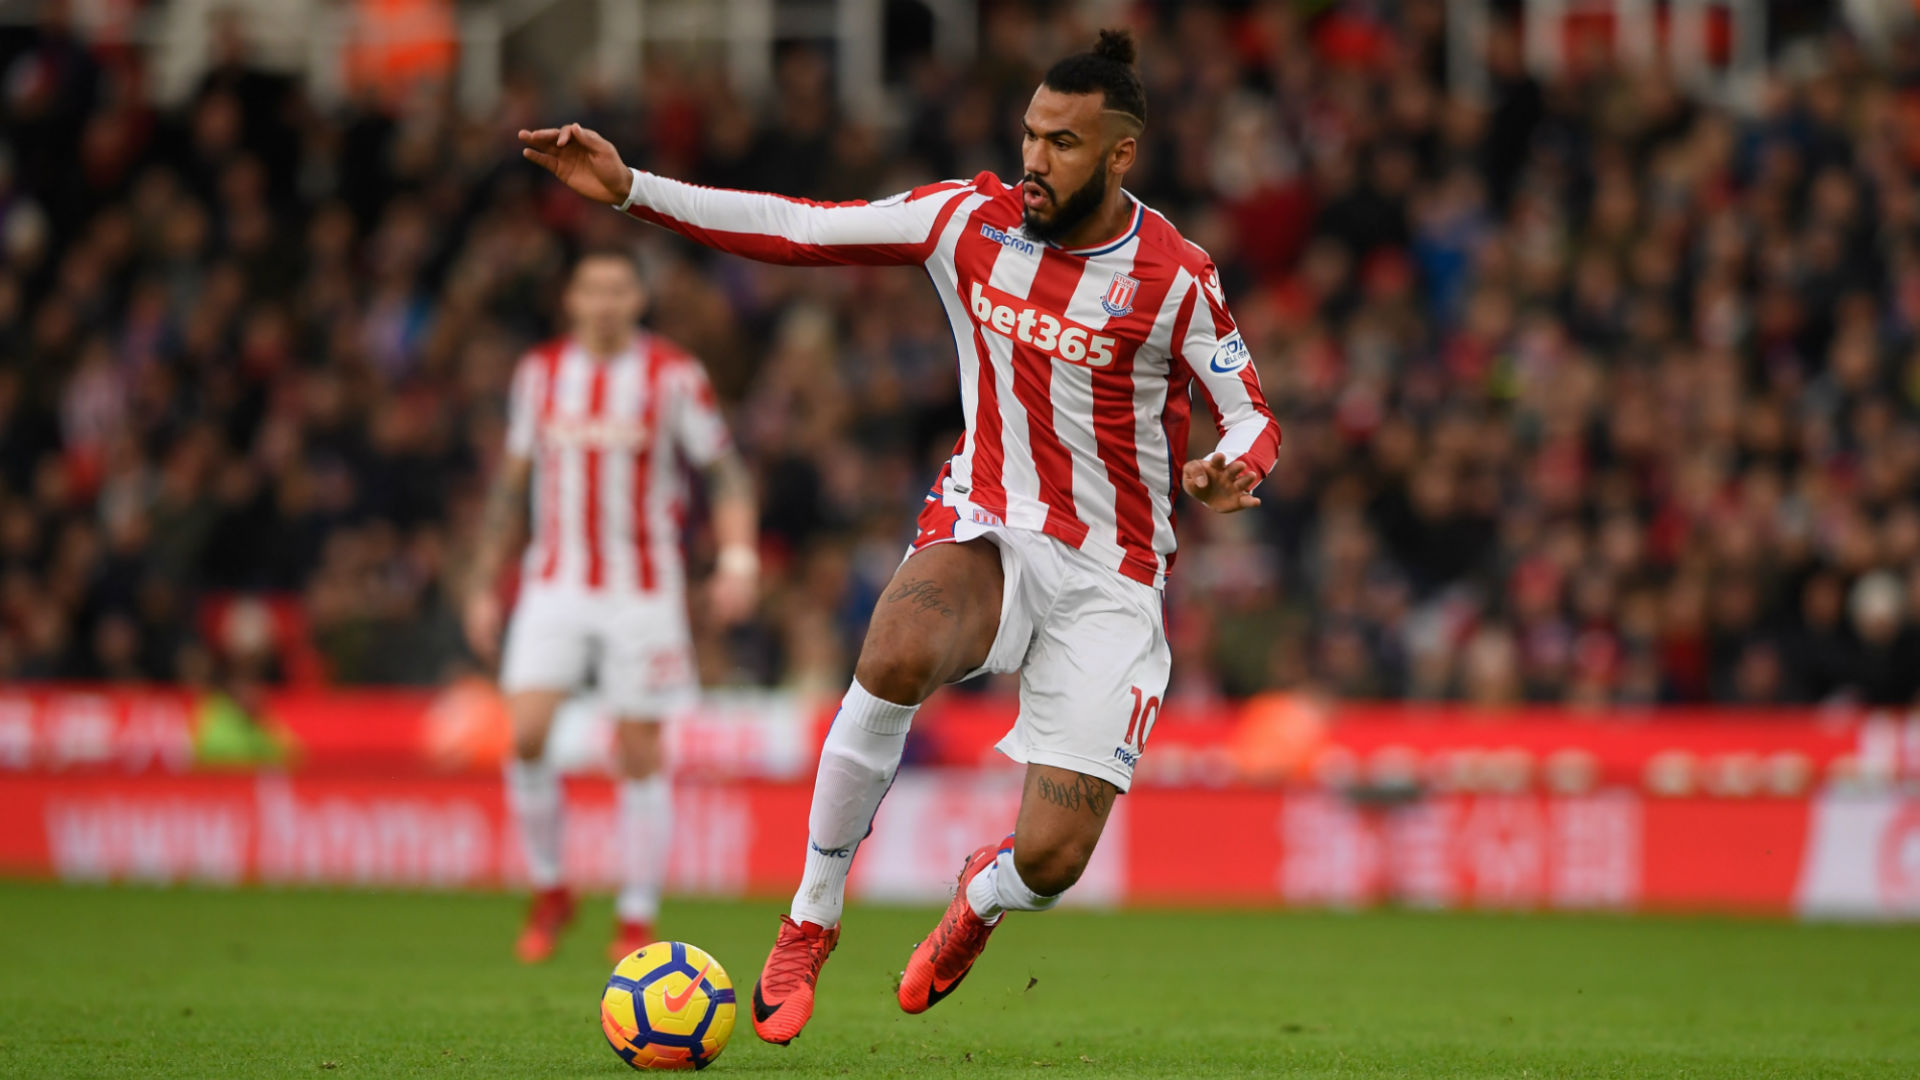 PSG Sign Choupo-Moting From Stoke City